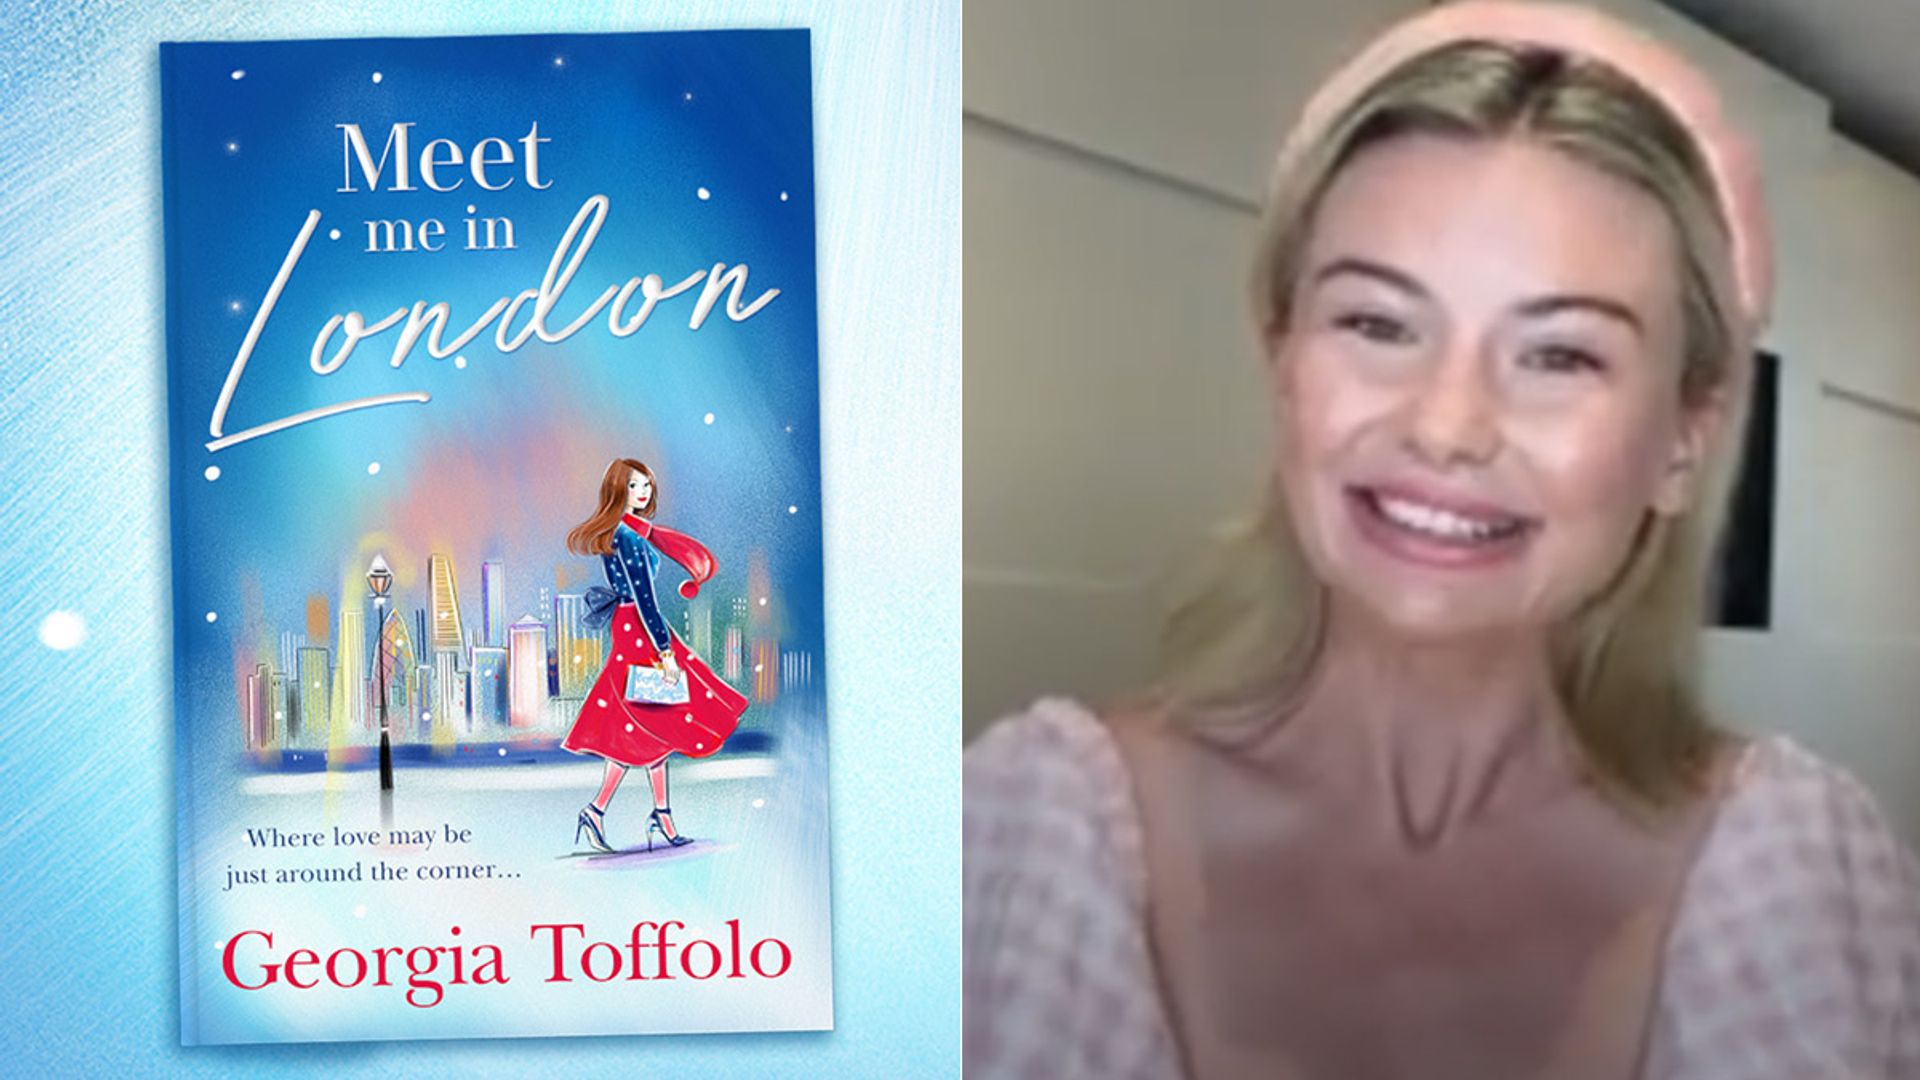 Georgia Toffolo shares first chapter of her romantic debut novel Meet me in London - read it here